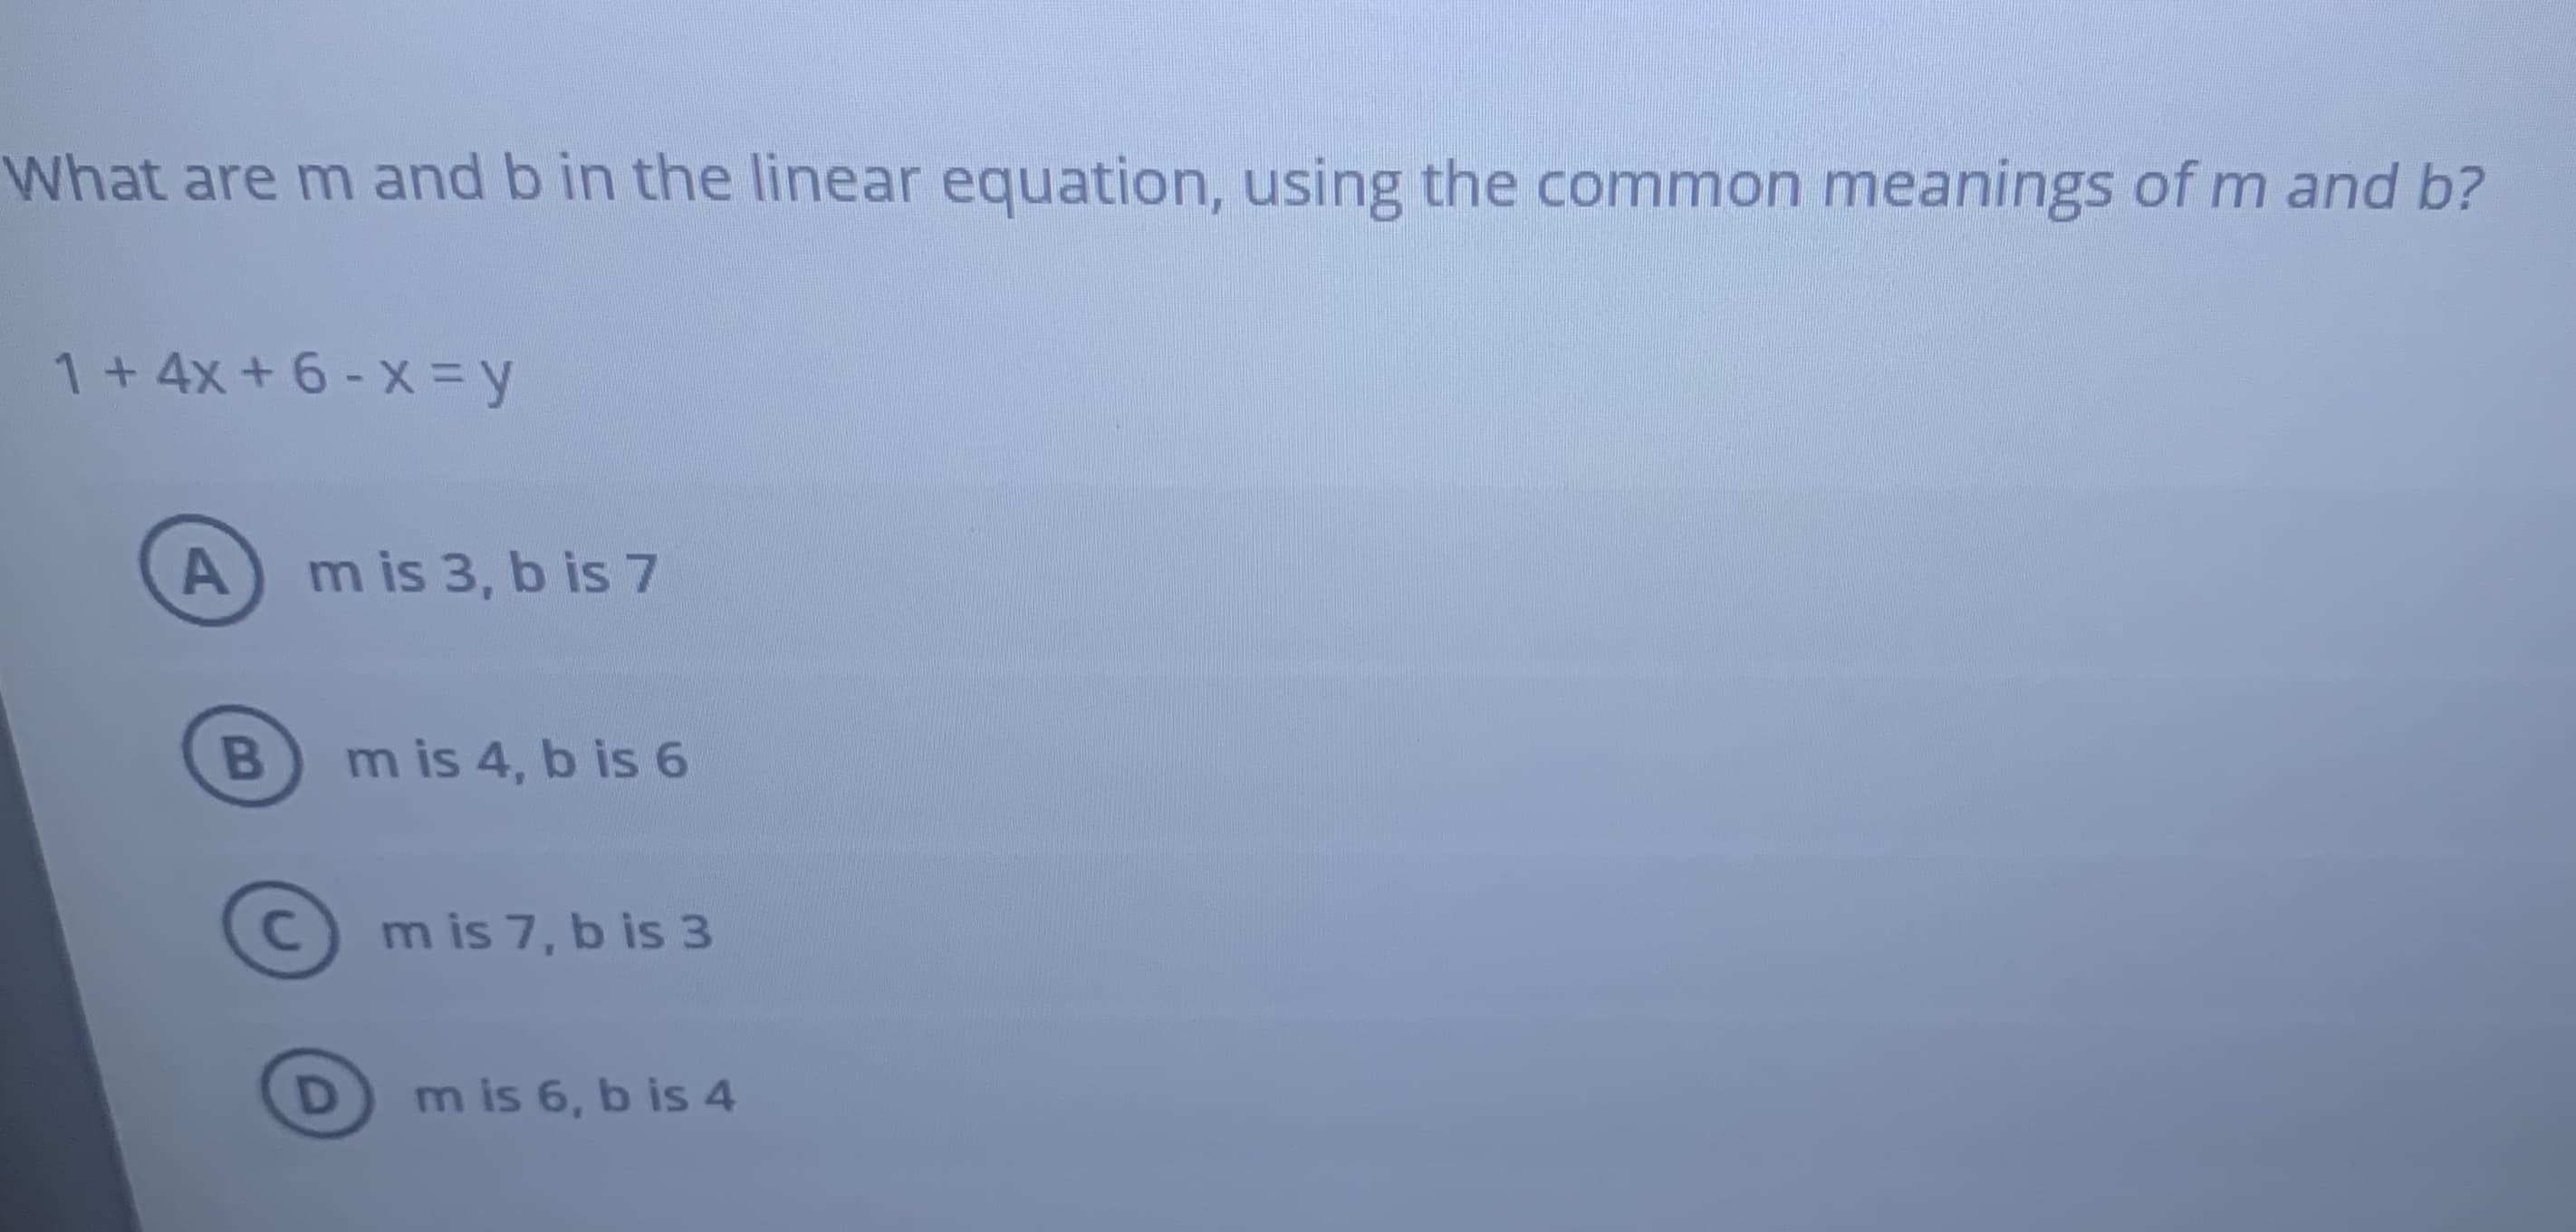 What are m and b in the linear equation, using the common meanings of m and b?
1+ 4x + 6 - X = y
m is 3, b is 7
m is 4, b is 6
m is 7, b is 3
B
